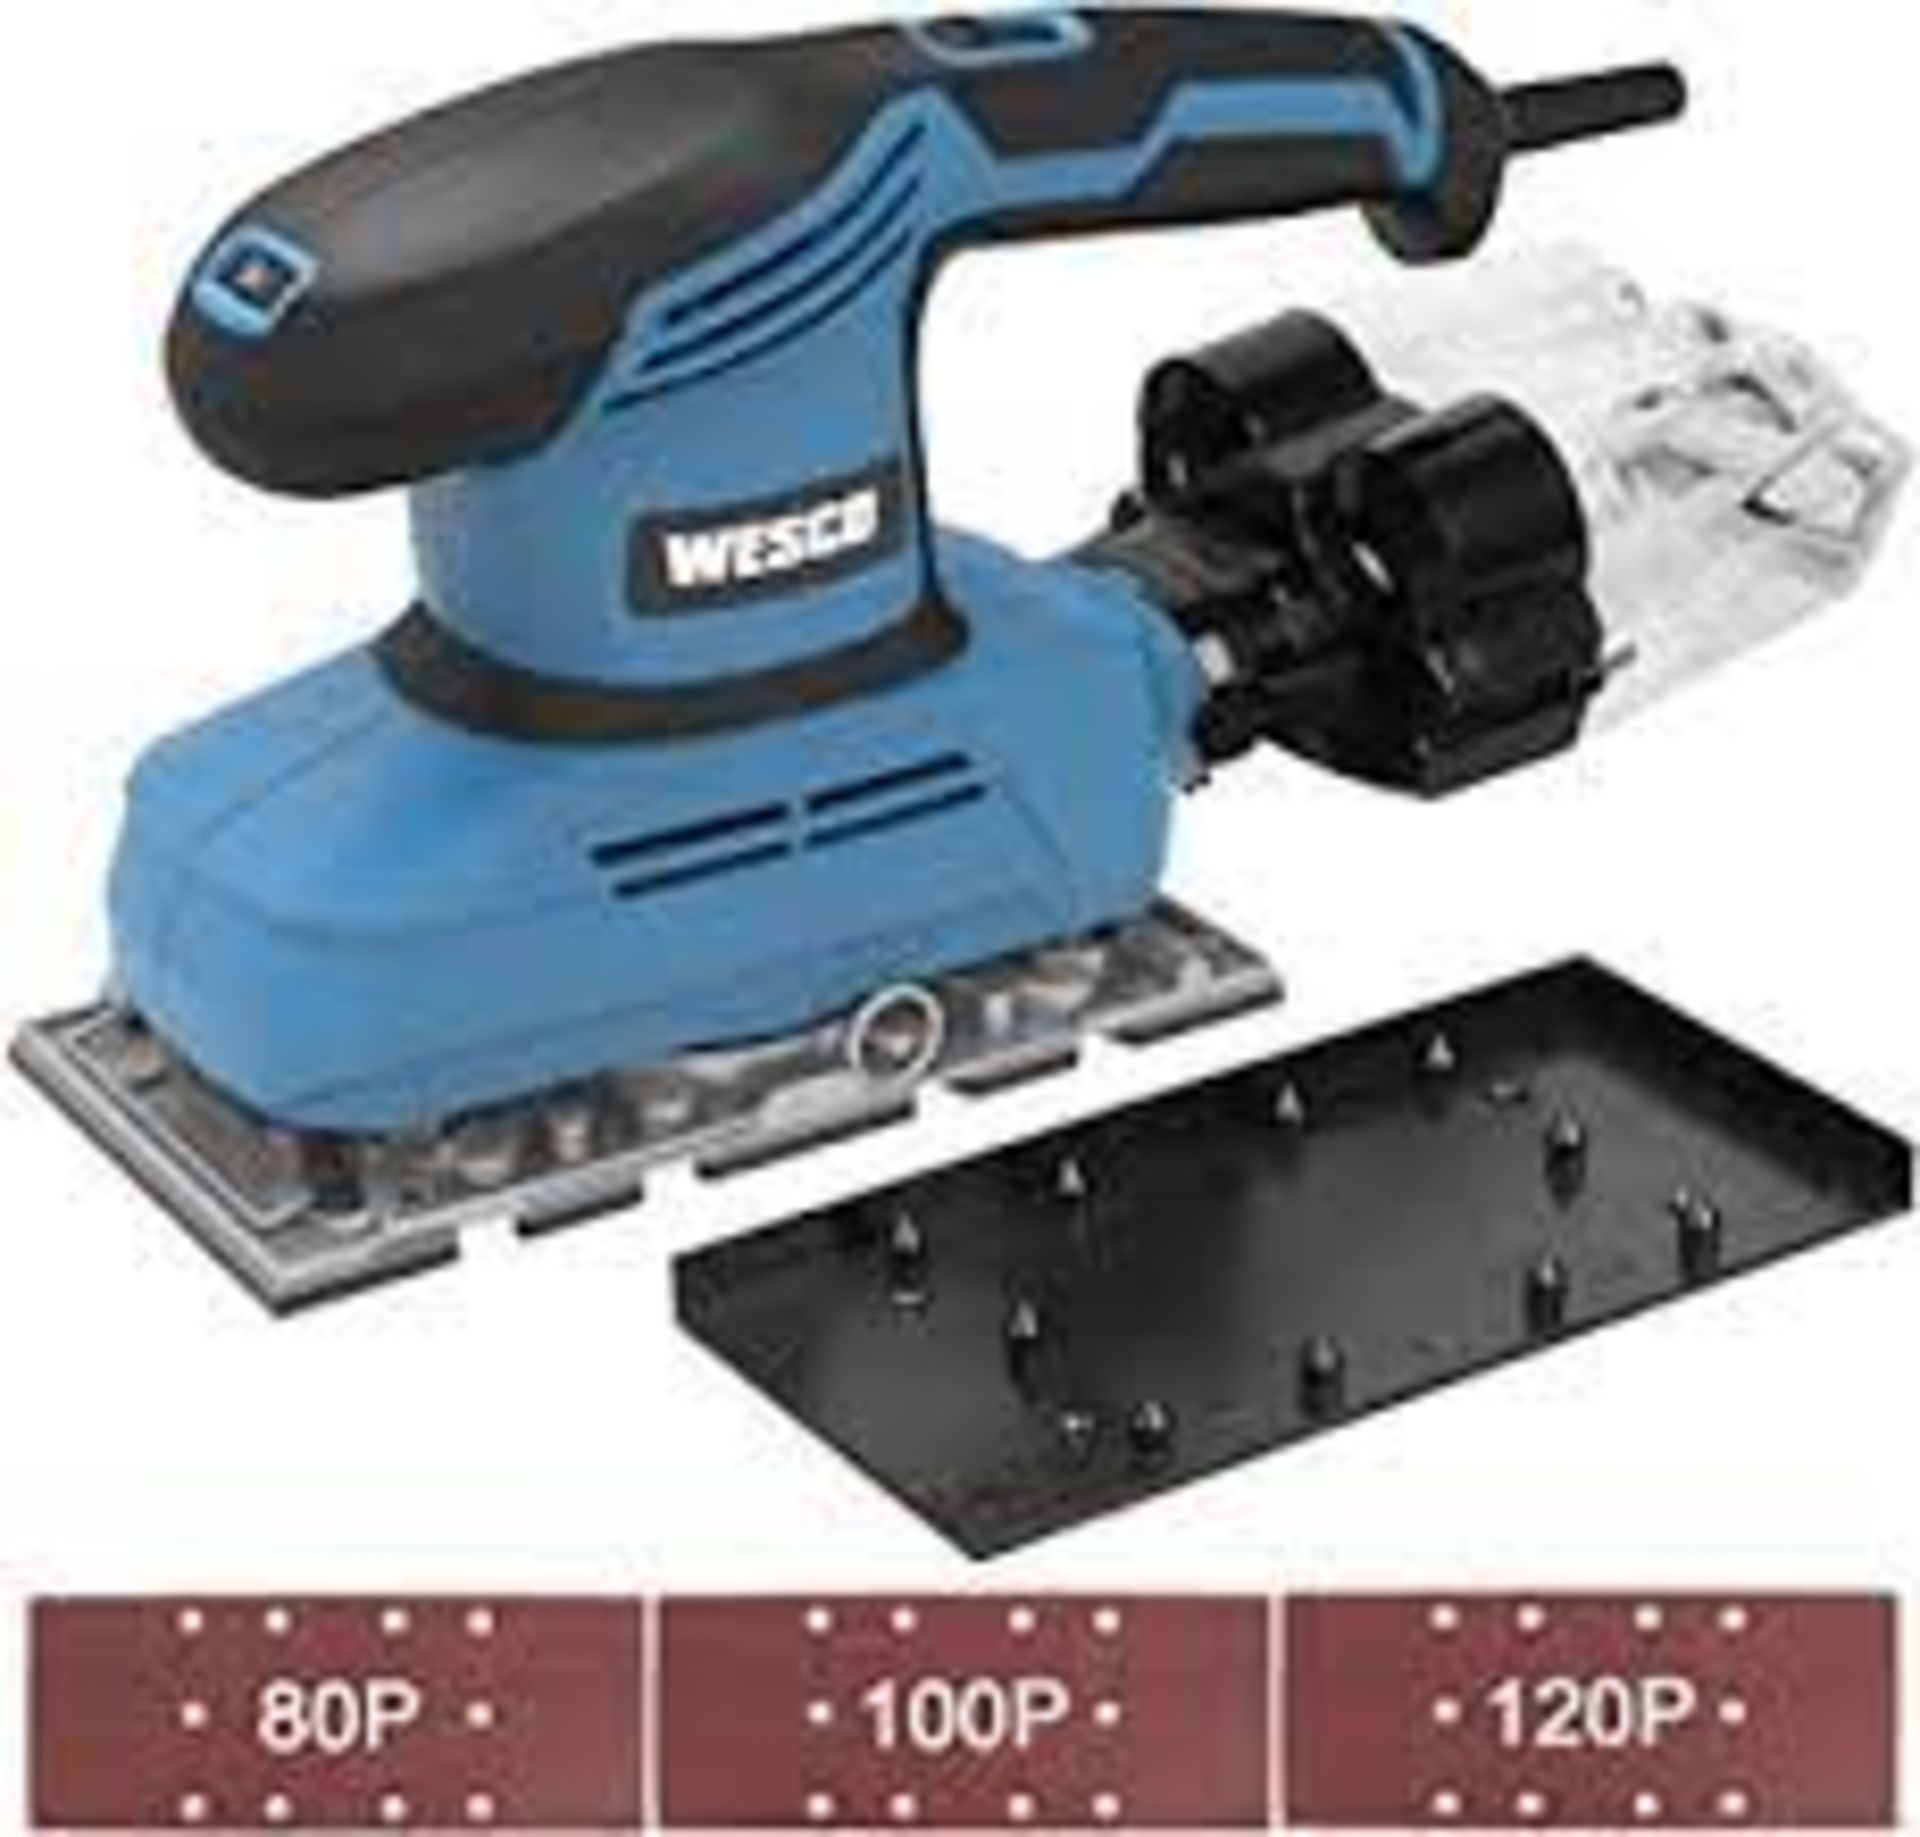 2 X NEW BOXED WESCO 240W 1/3 Sheet Sander with Aluminum Base, 7 Variable Speed Electric Orbital